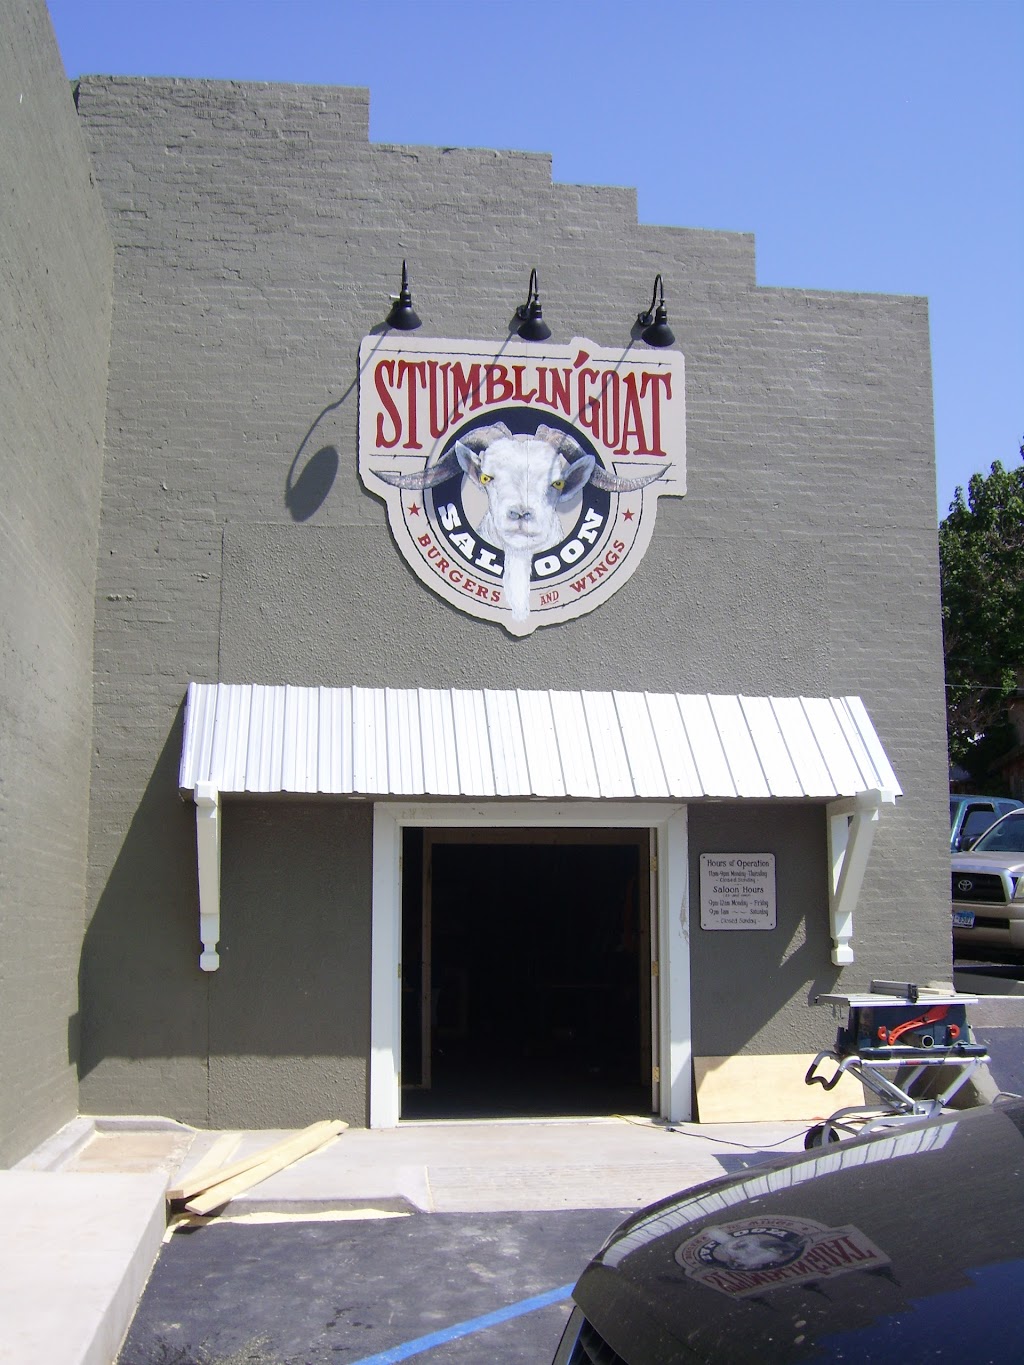 The Stumblin Goat Saloon | restaurant | 217 S 2nd St, Canadian, TX 79014, USA | 8063239257 OR +1 806-323-9257